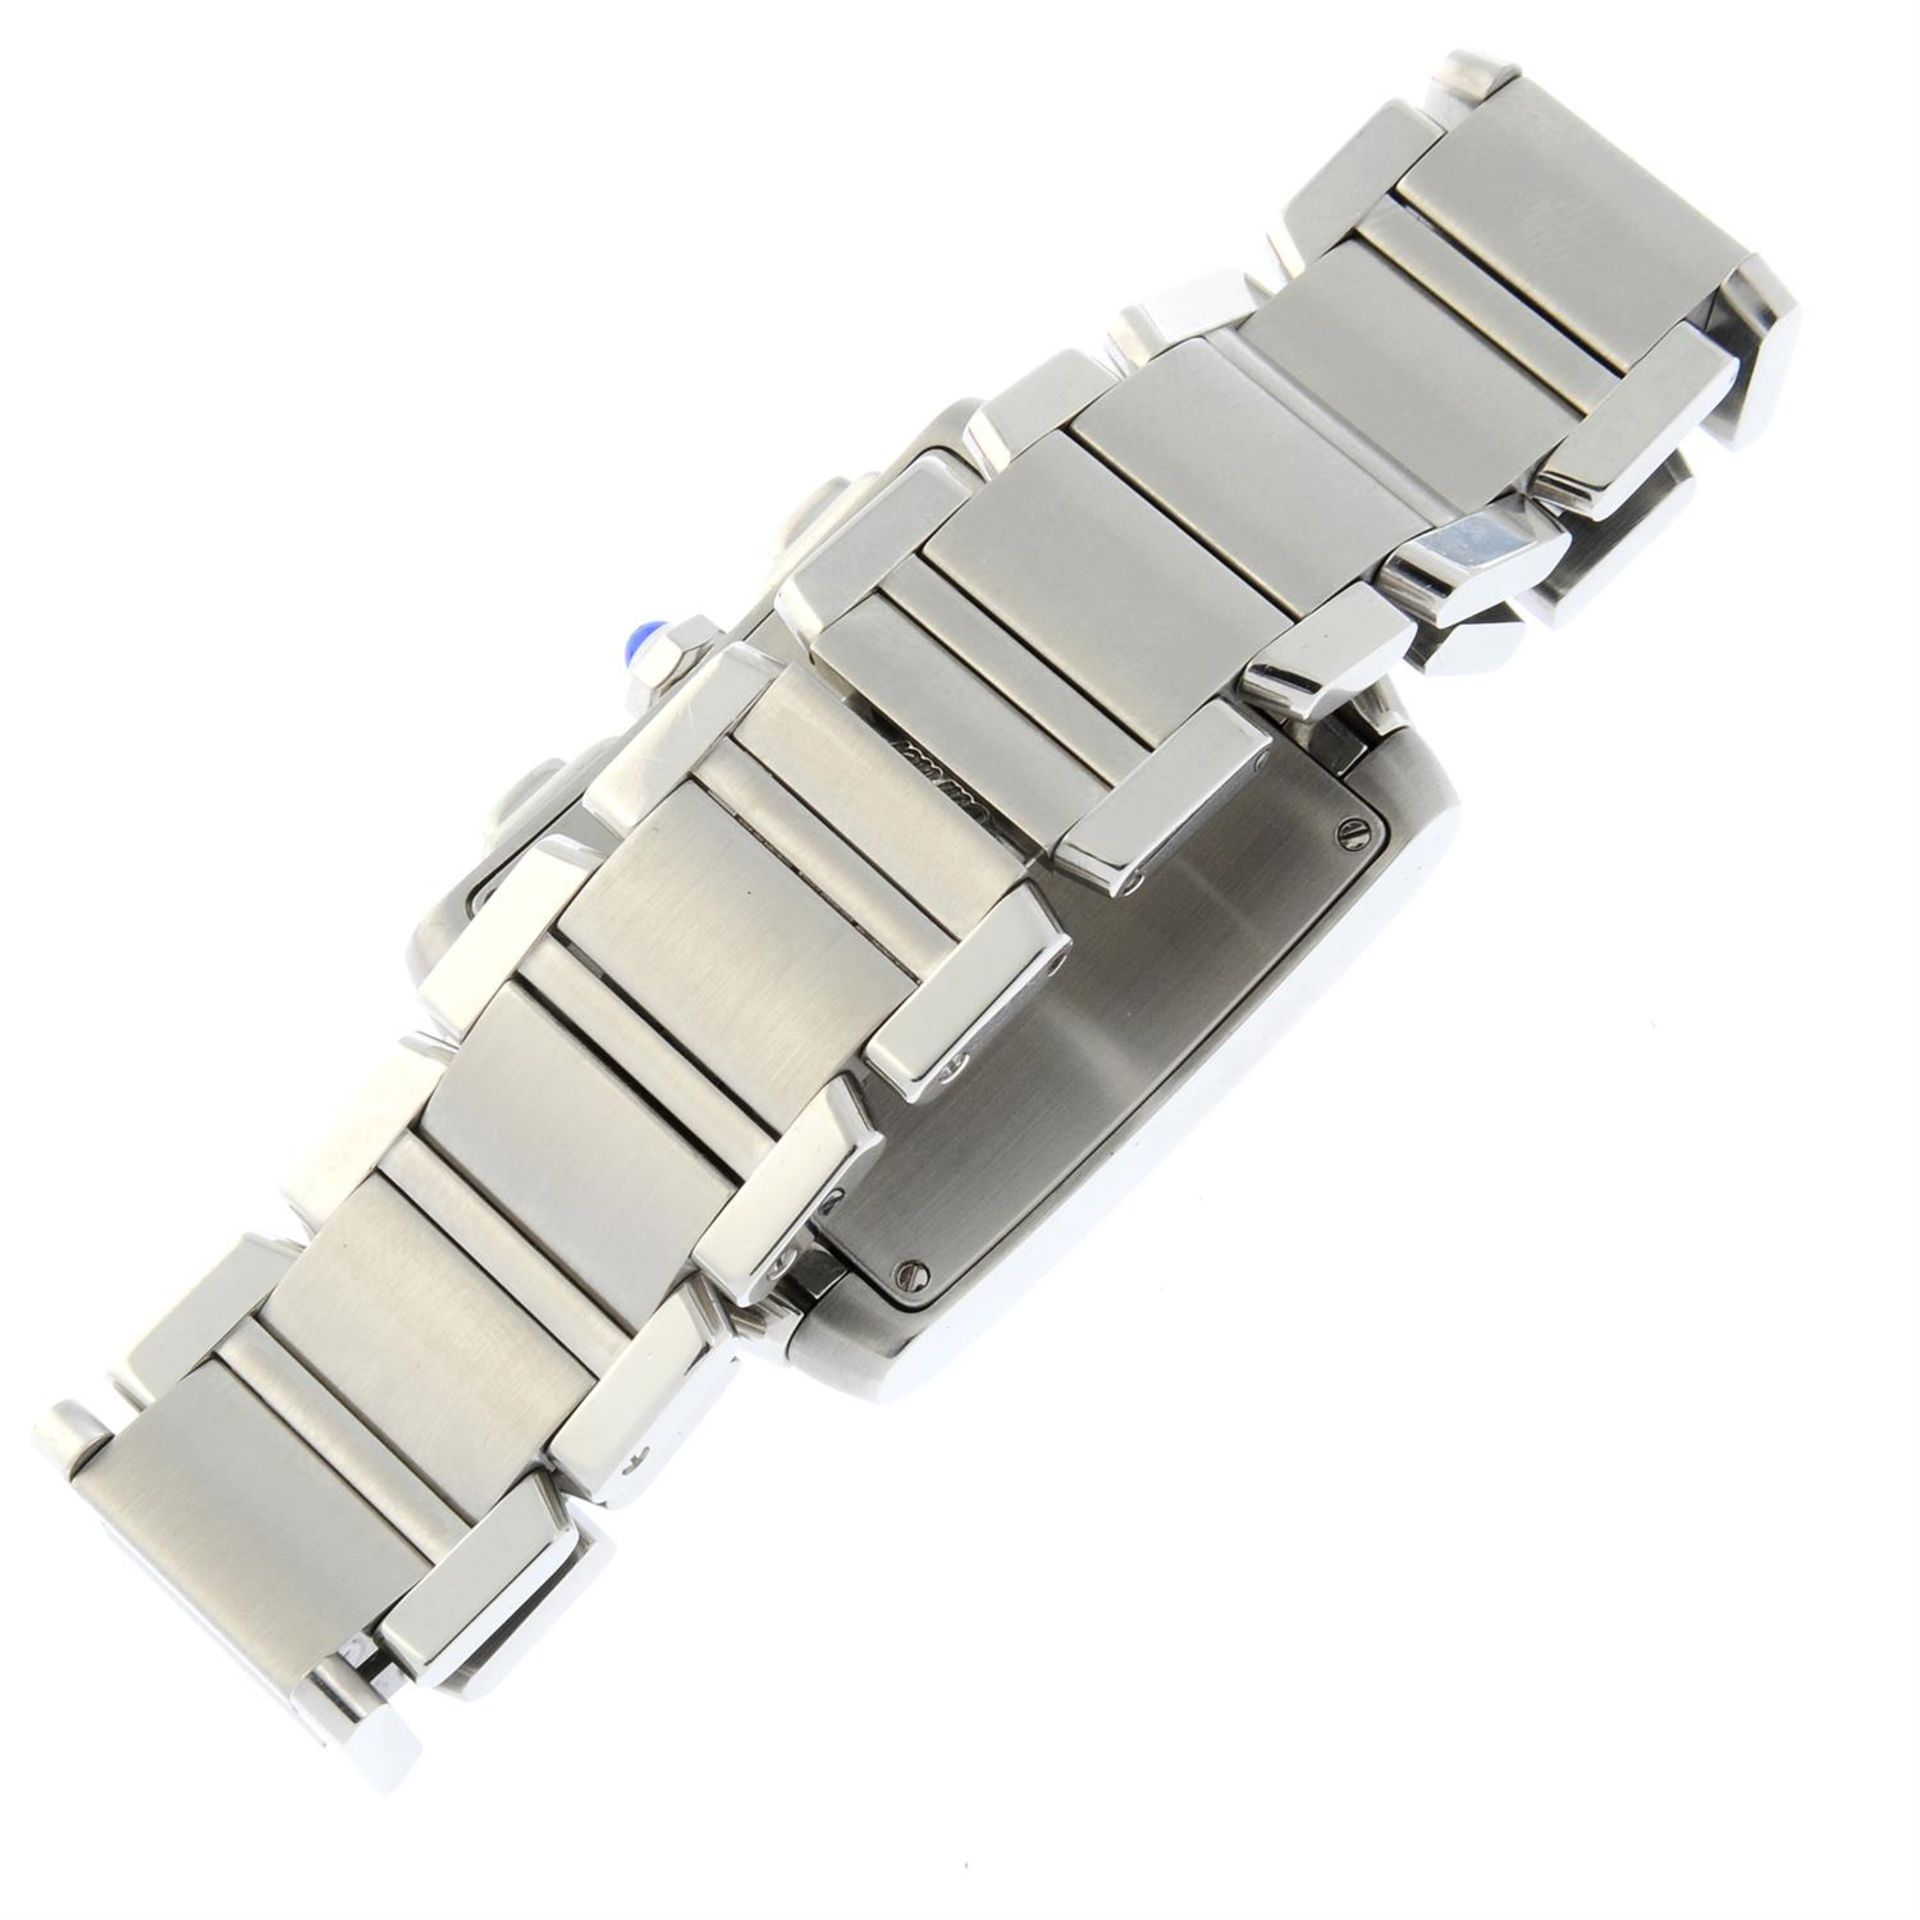 CARTIER - a stainless steel Tank Française chronograph bracelet watch, 28mm x 28mm. - Image 2 of 6